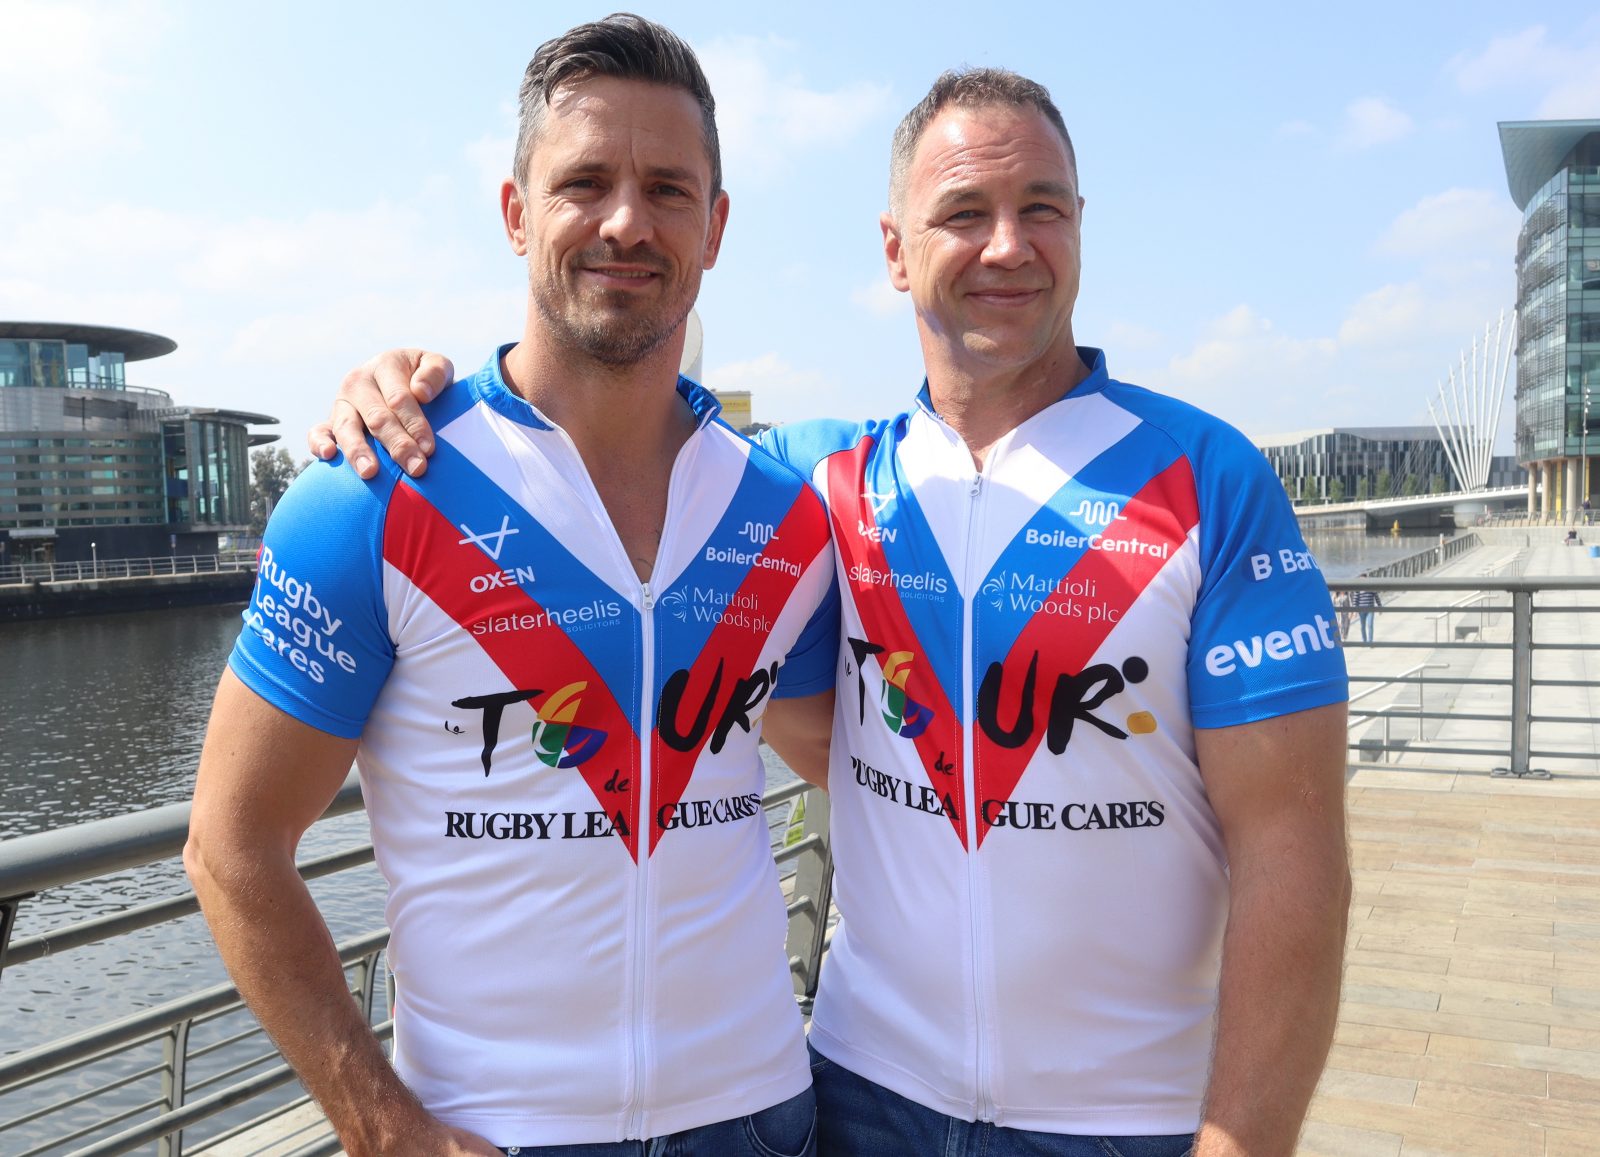 Rugby League Cares appoints Oxen as the charity’s apparel supplier